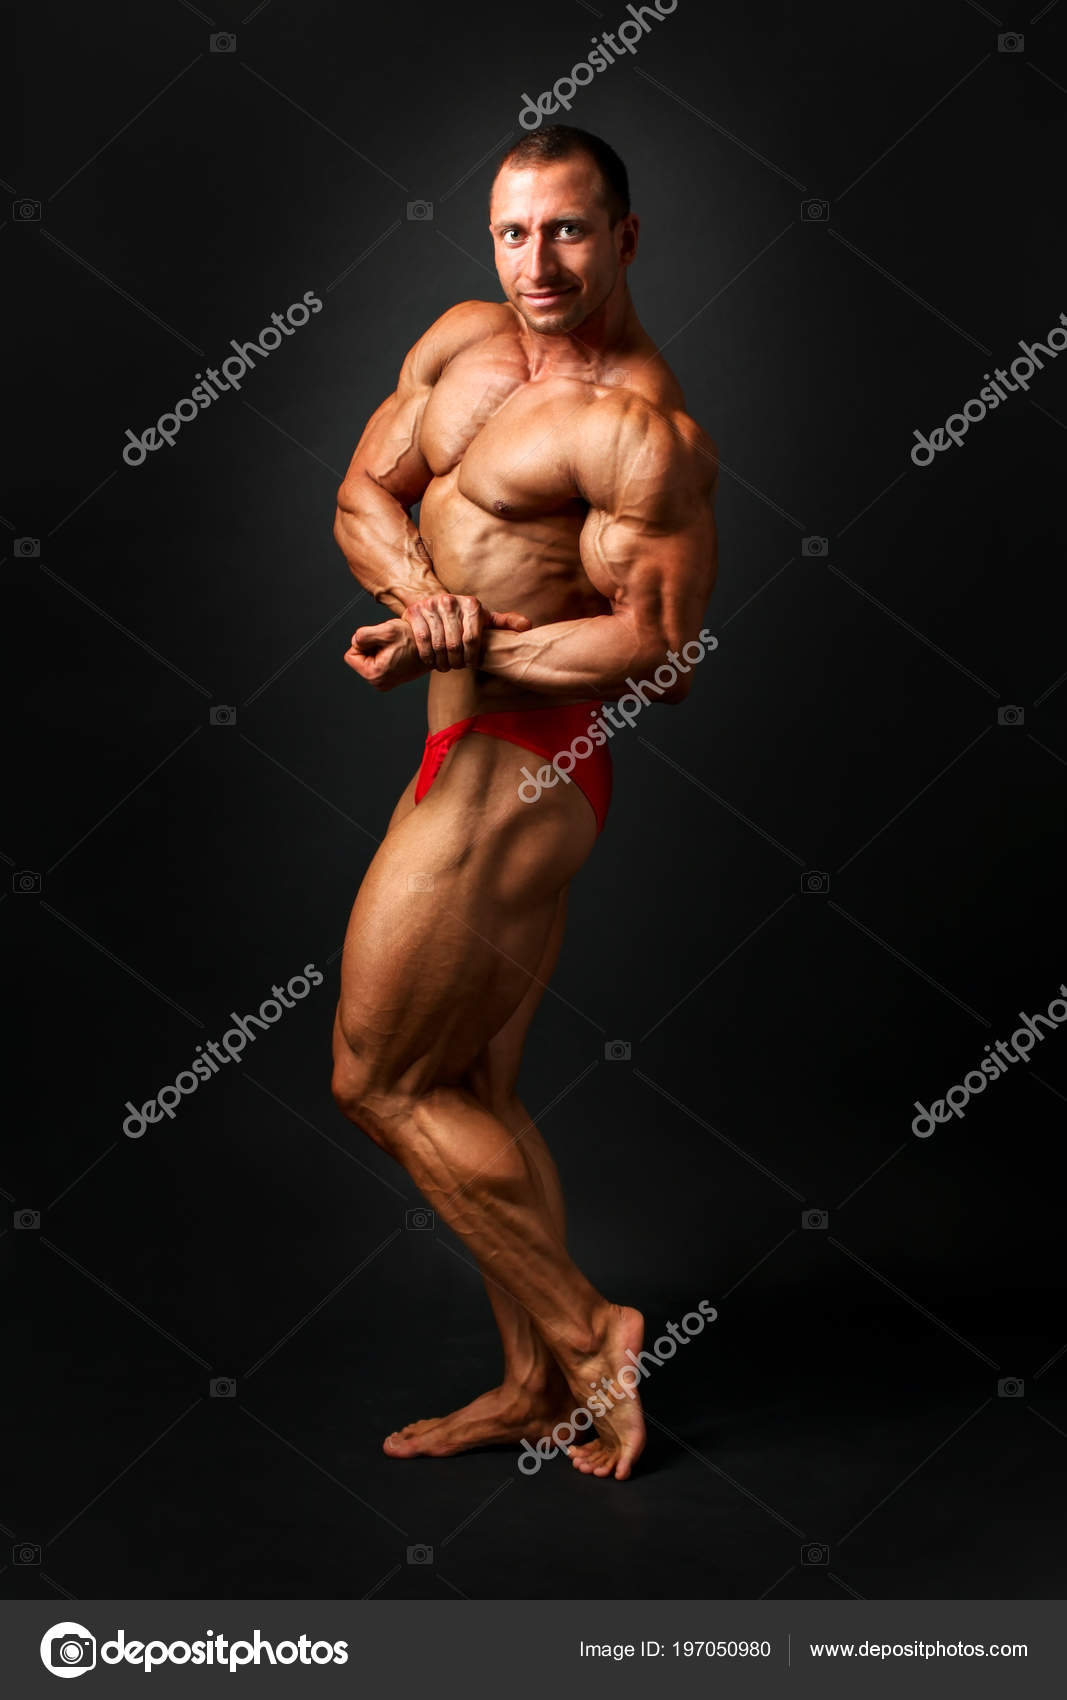 Bodybuilder Performing Side Chest Pose Stock Image - Image of people,  equipment: 227372591